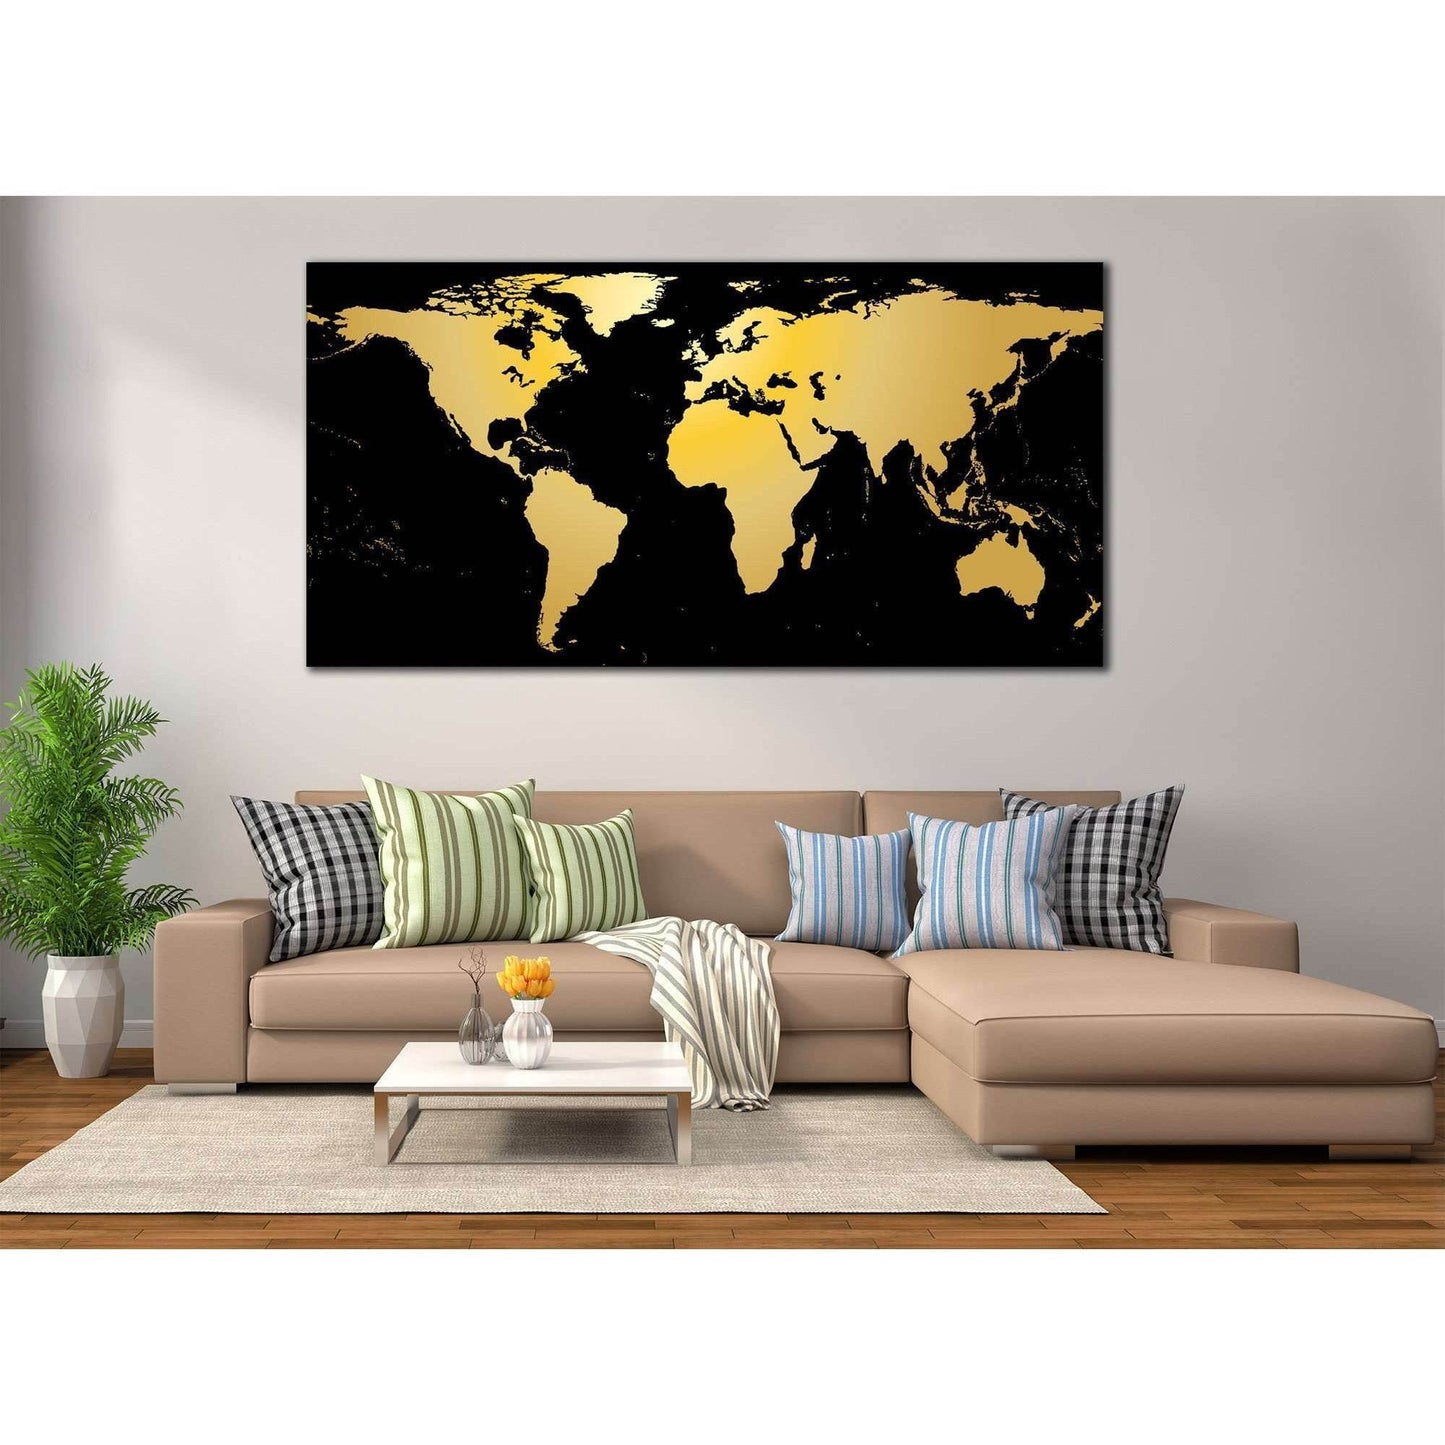 Black / Gold World Map Office Wall DecorDecorate your walls with a stunning Black World Map Canvas Art Print from the world's largest art gallery. Choose from thousands of World Map artworks with various sizing options. Choose your perfect art print to co